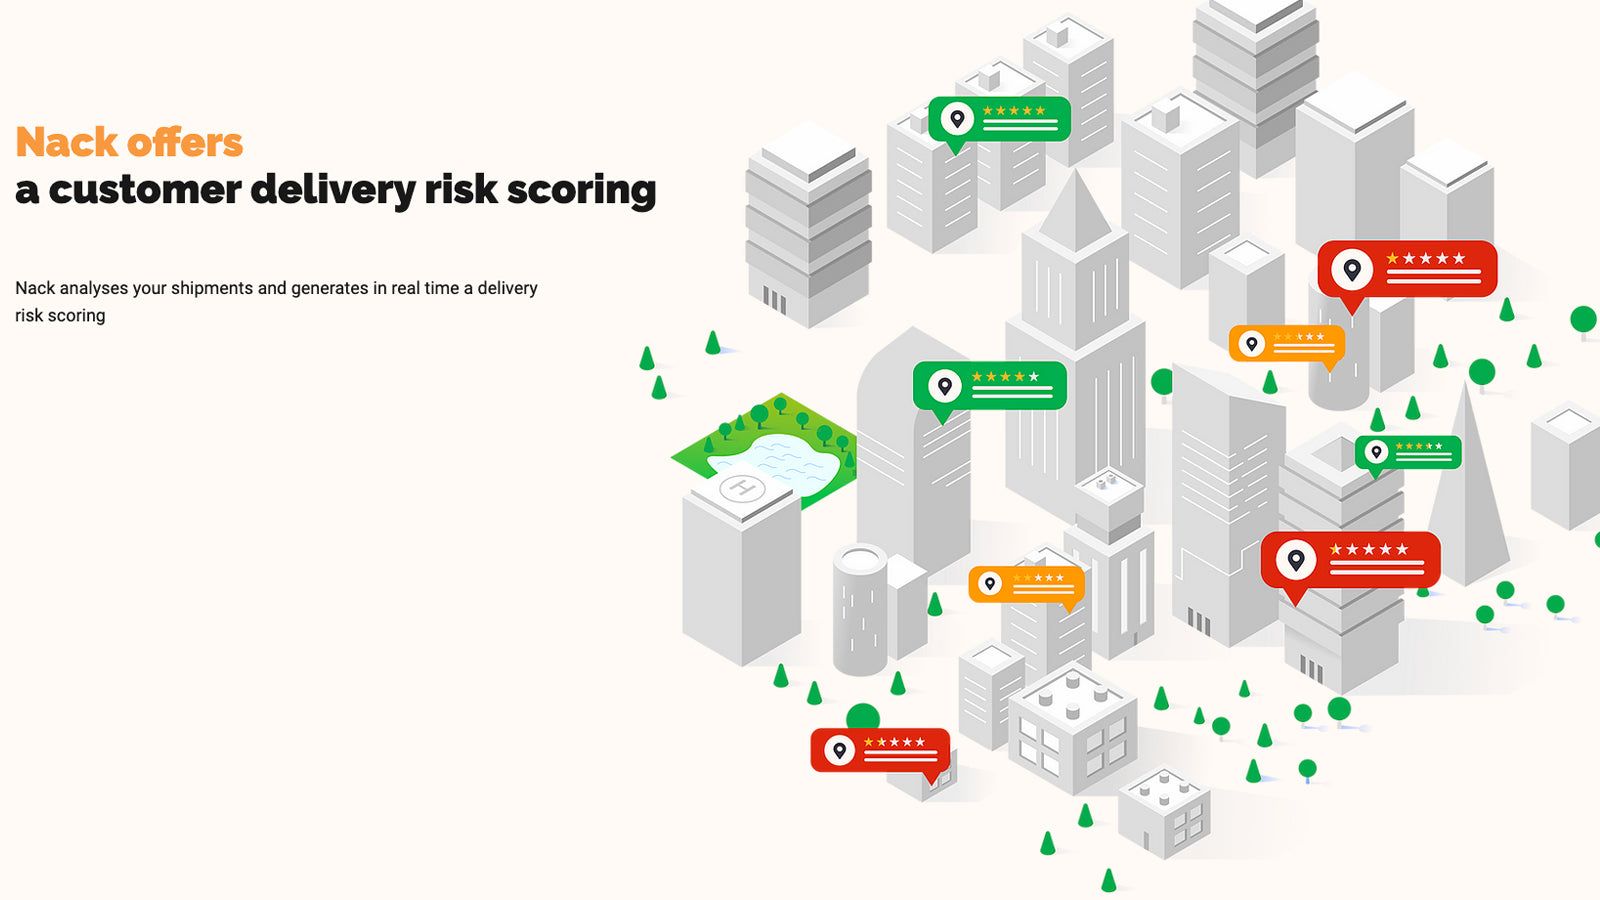 Nack offers customer delivery risk scoring